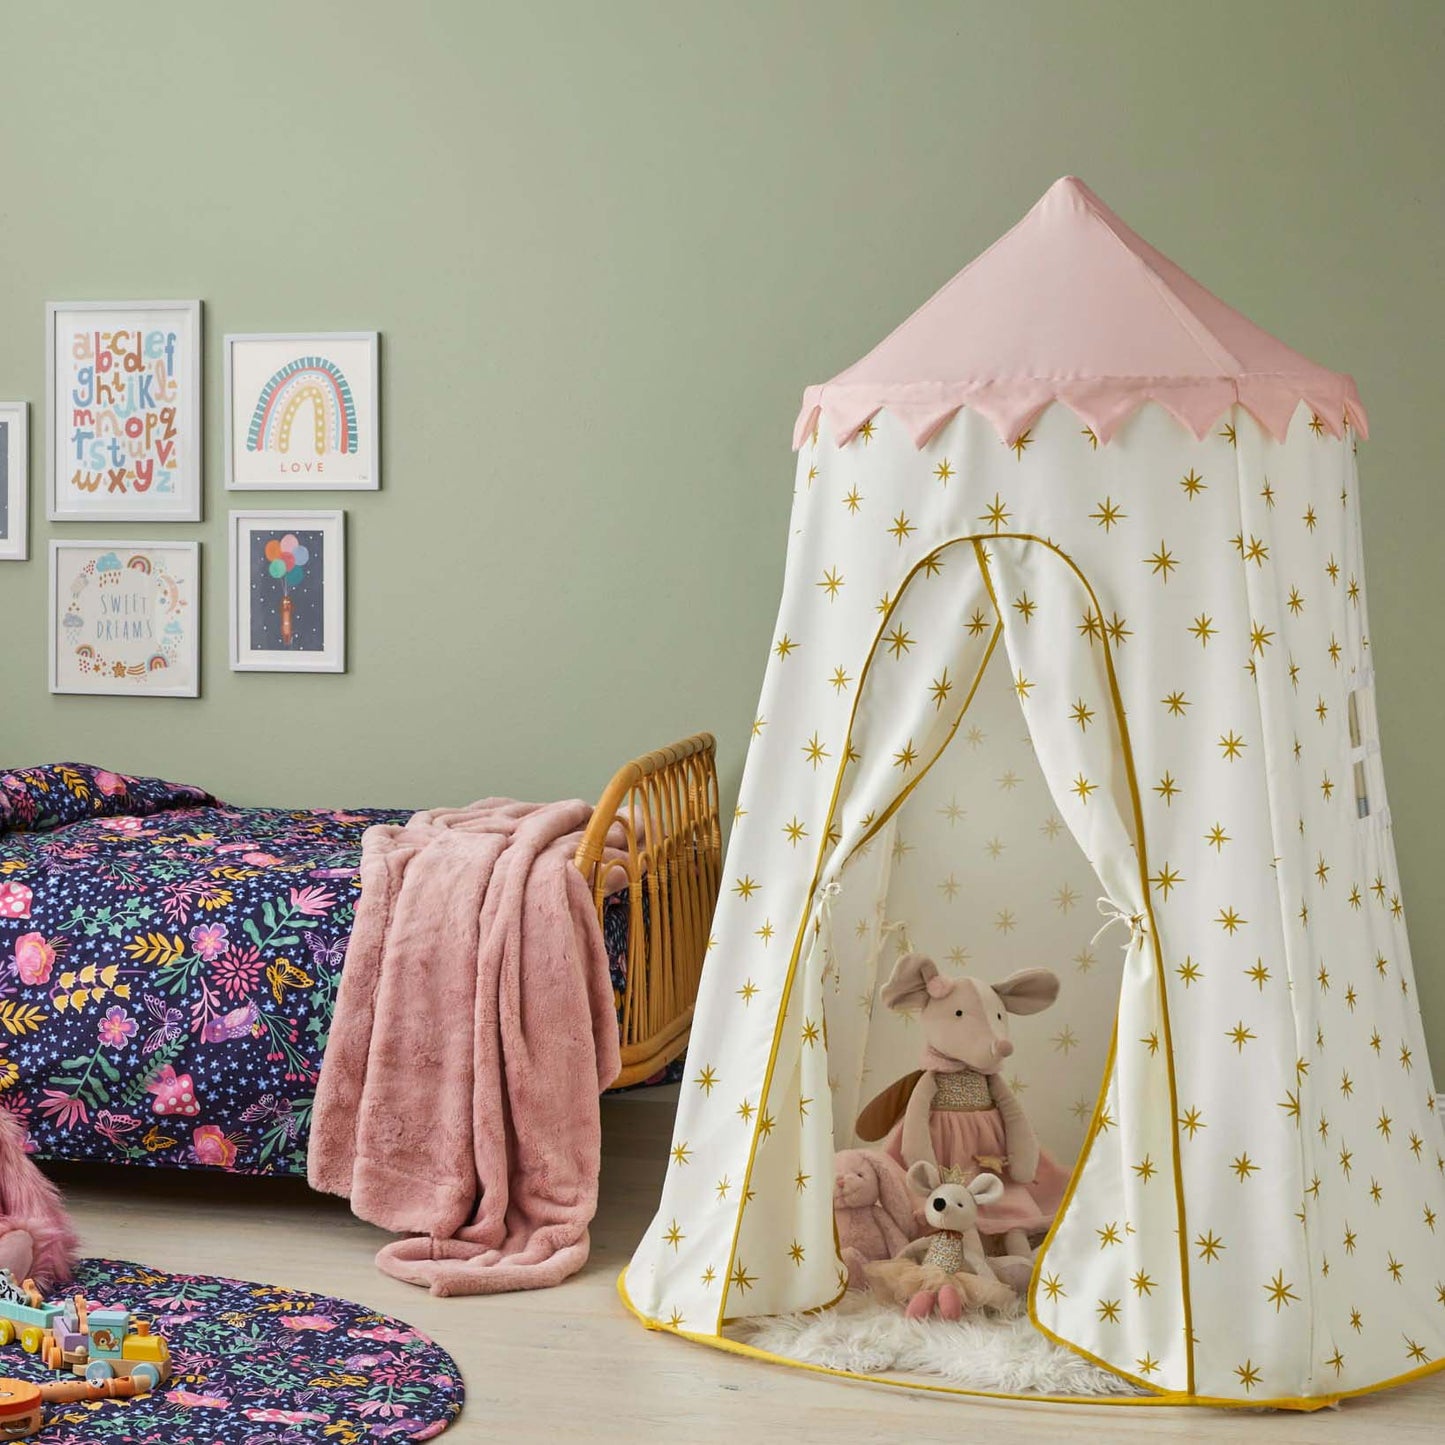 Starburst Pop Up Play Tent by Jiggle & Giggle